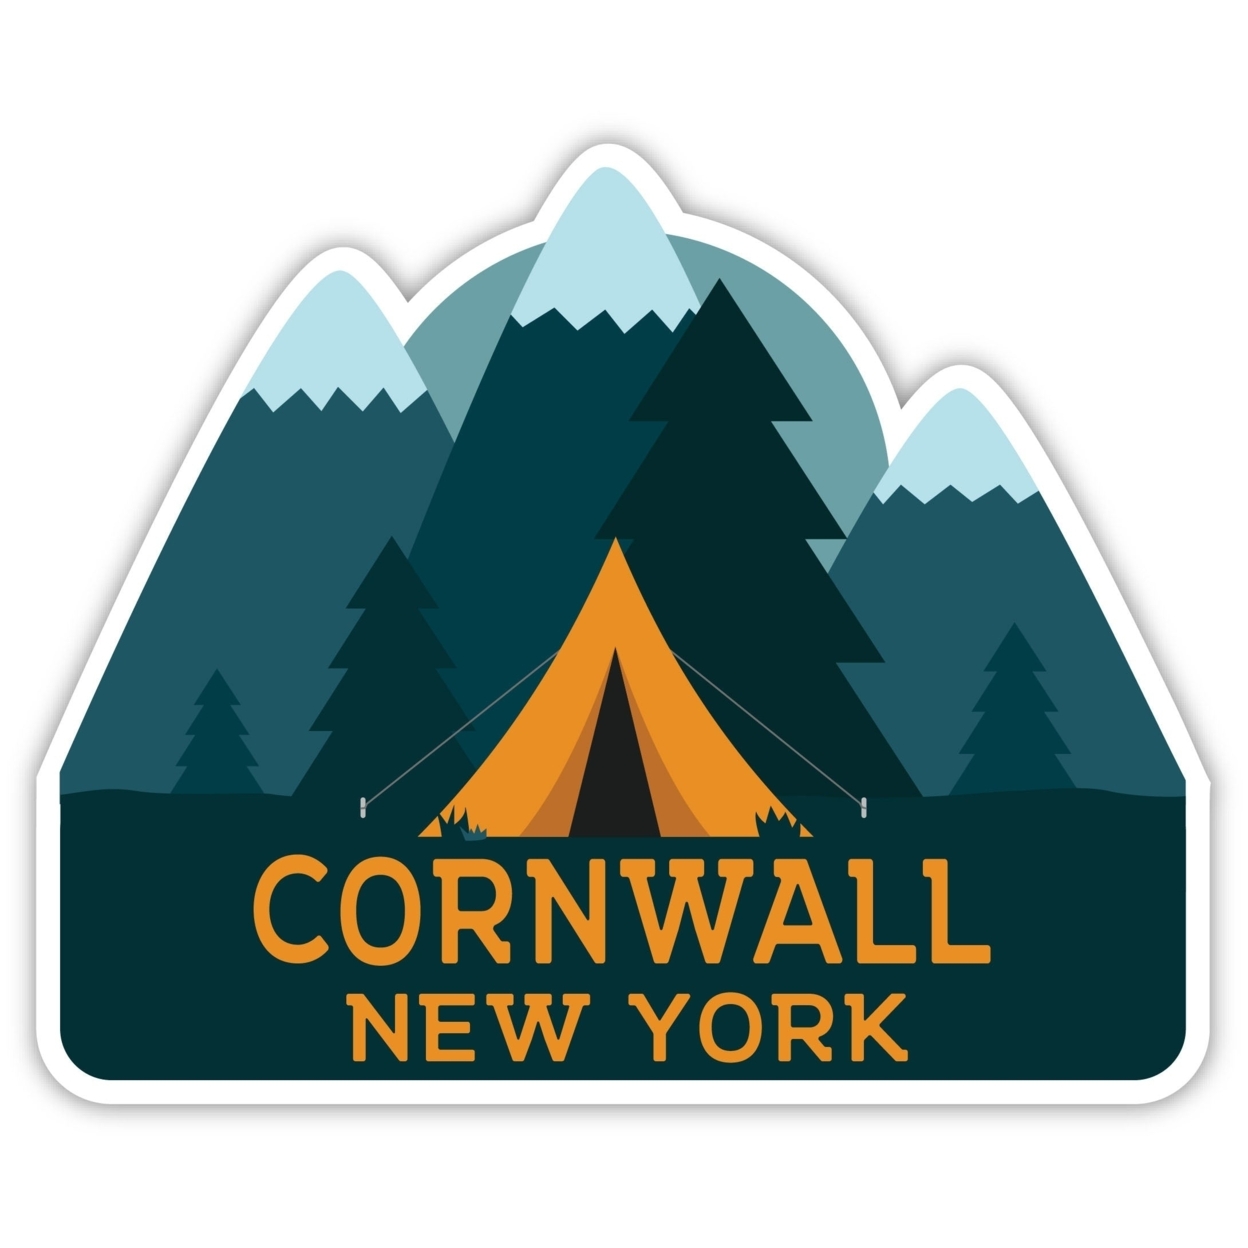 Cornwall New York Souvenir Decorative Stickers (Choose Theme And Size) - 4-Pack, 2-Inch, Tent